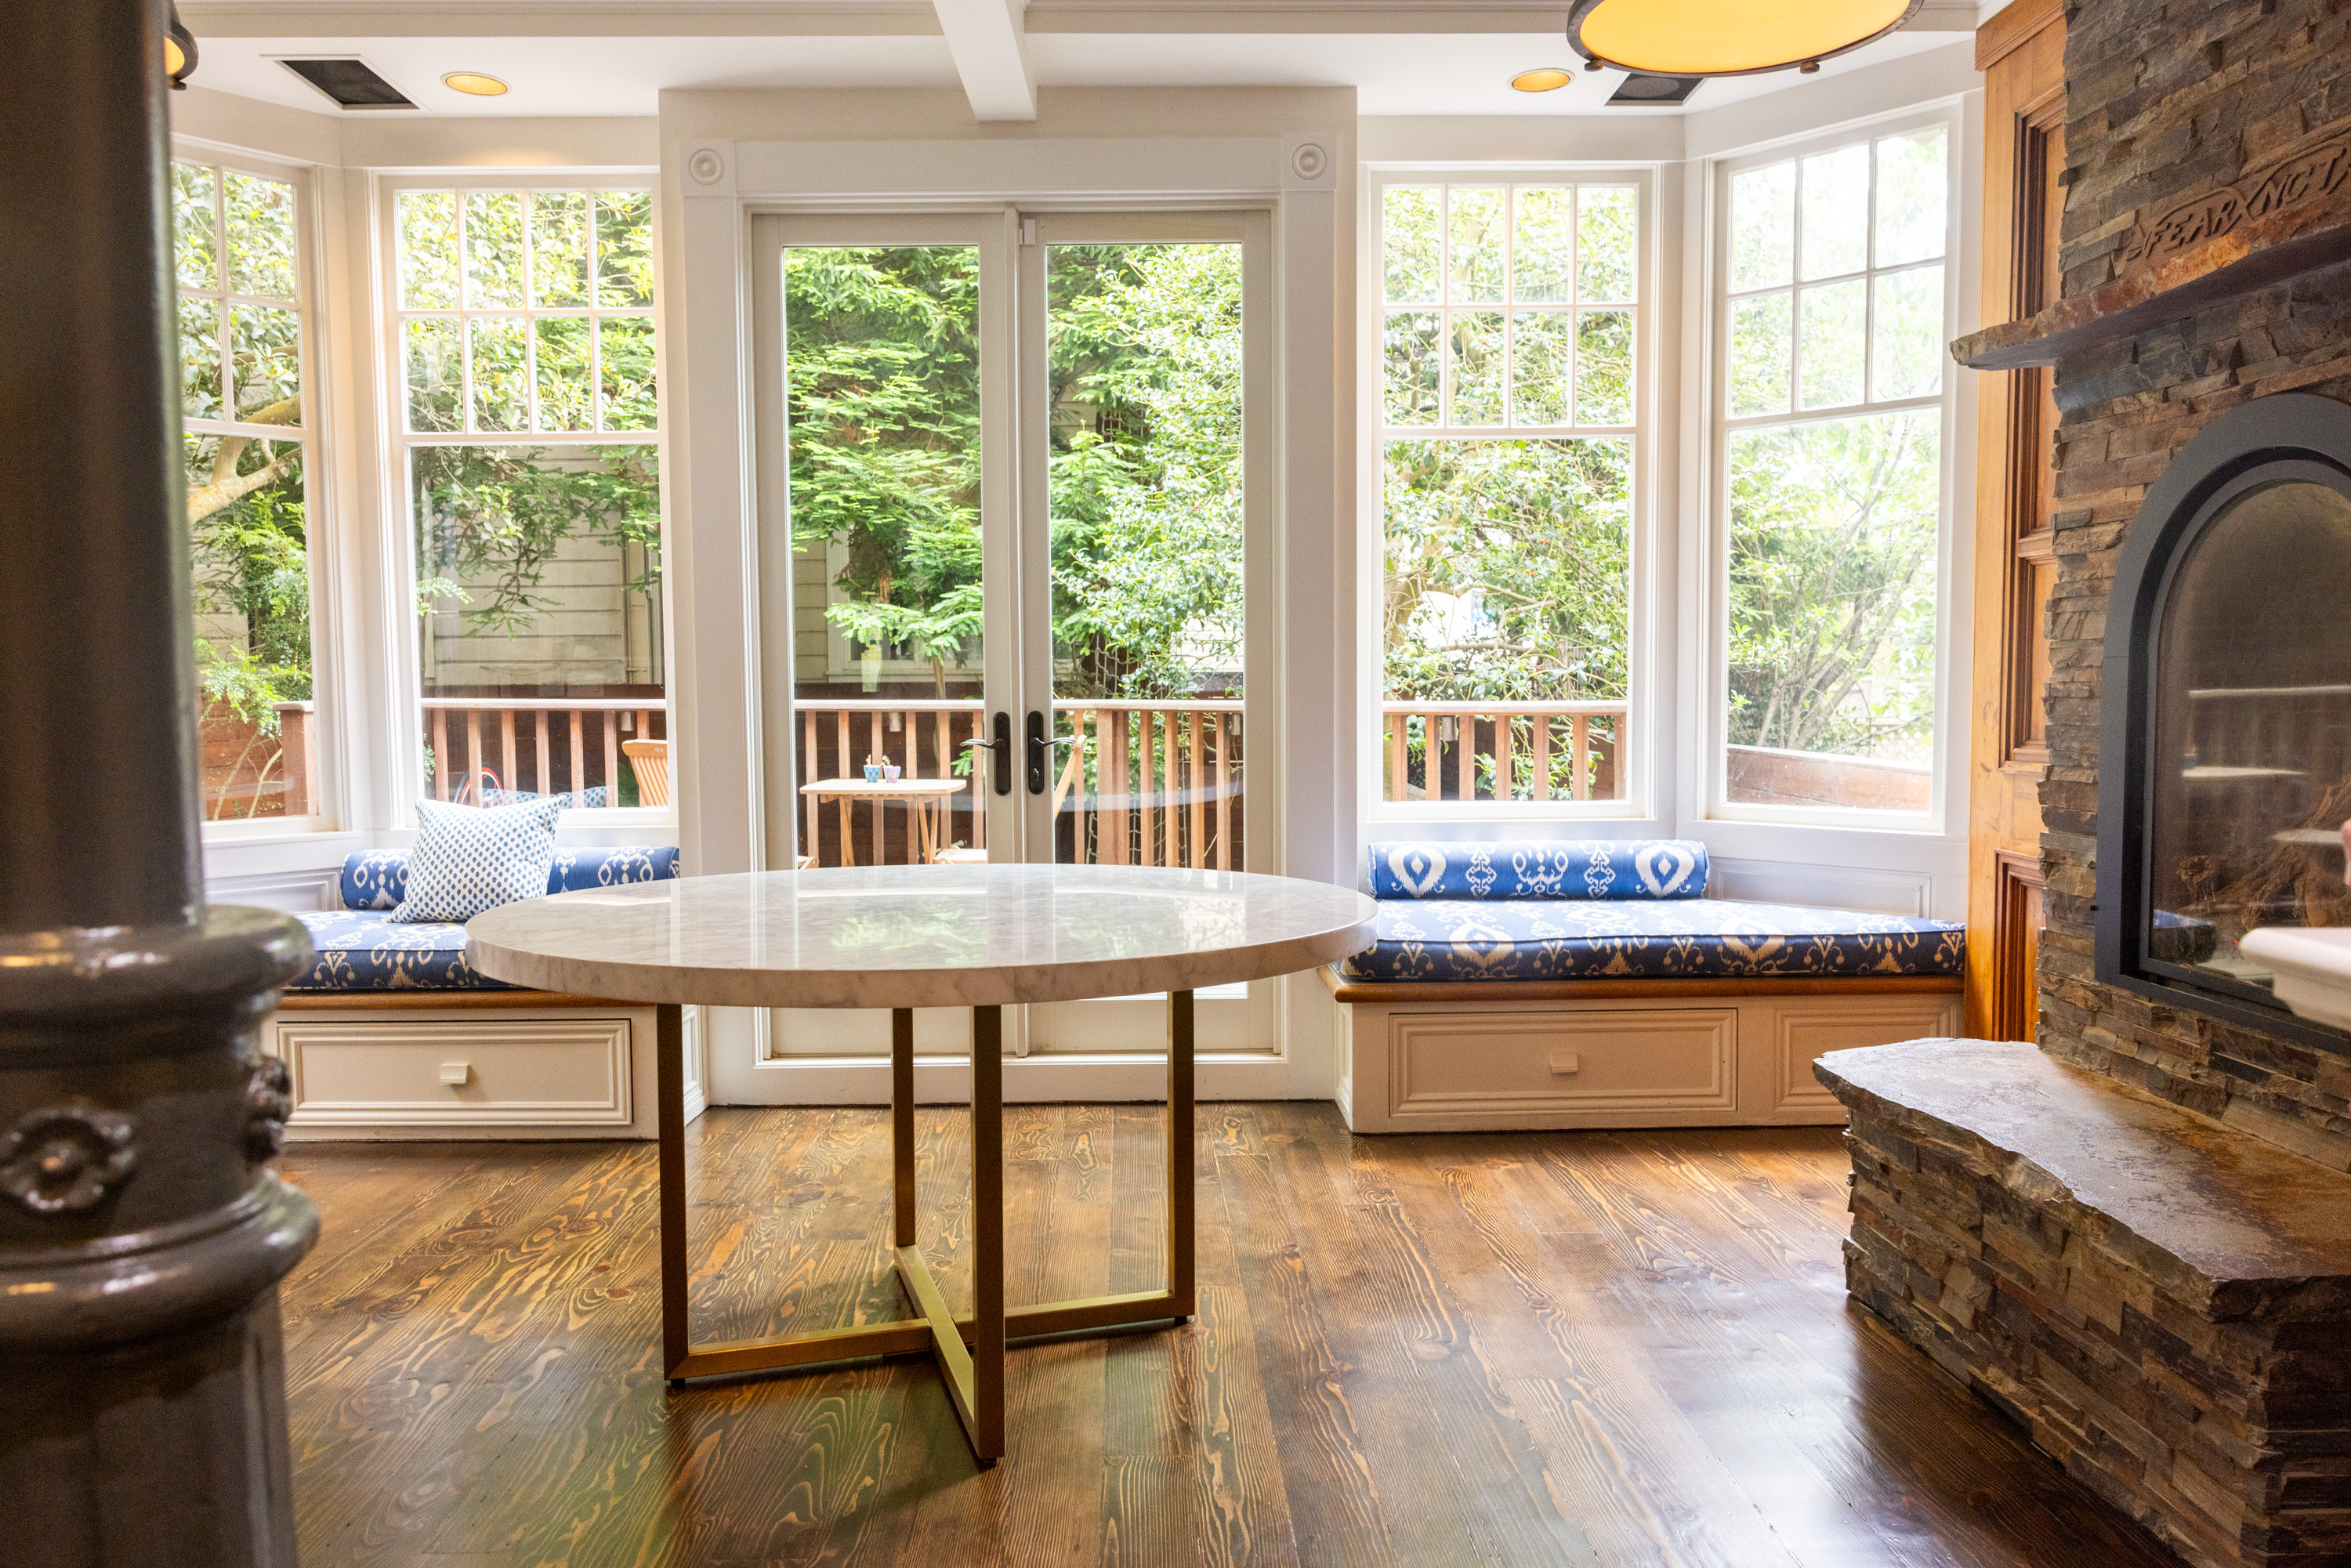 The bright room features a round table, built-in window seats with blue cushions, large windows with greenery outside, and a stone fireplace.